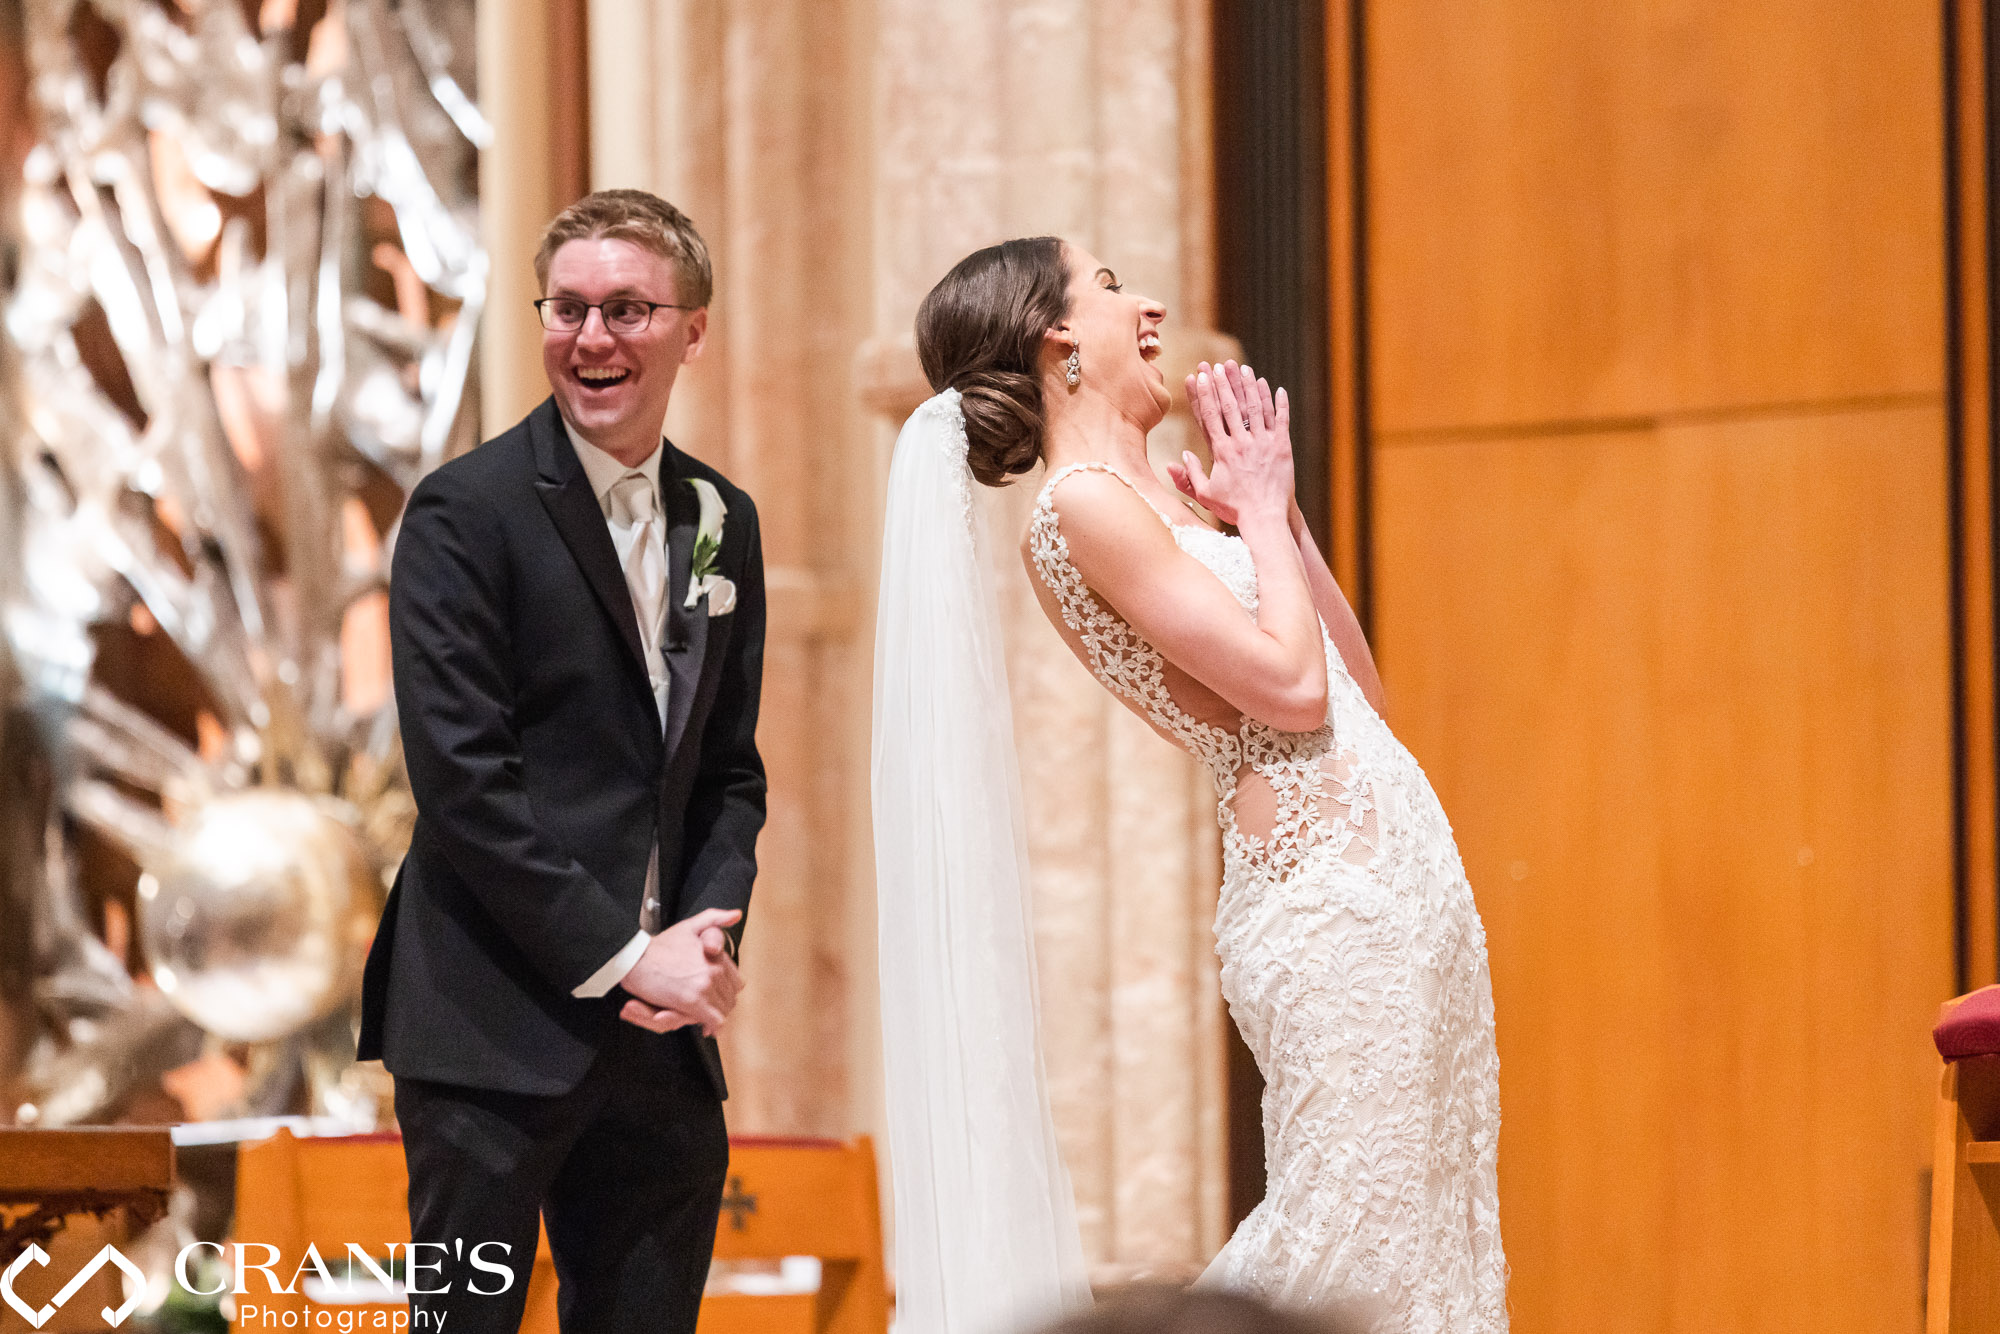 A candid moment between a bride and groom during their wedding ceremony at Holy Name Cathedral.